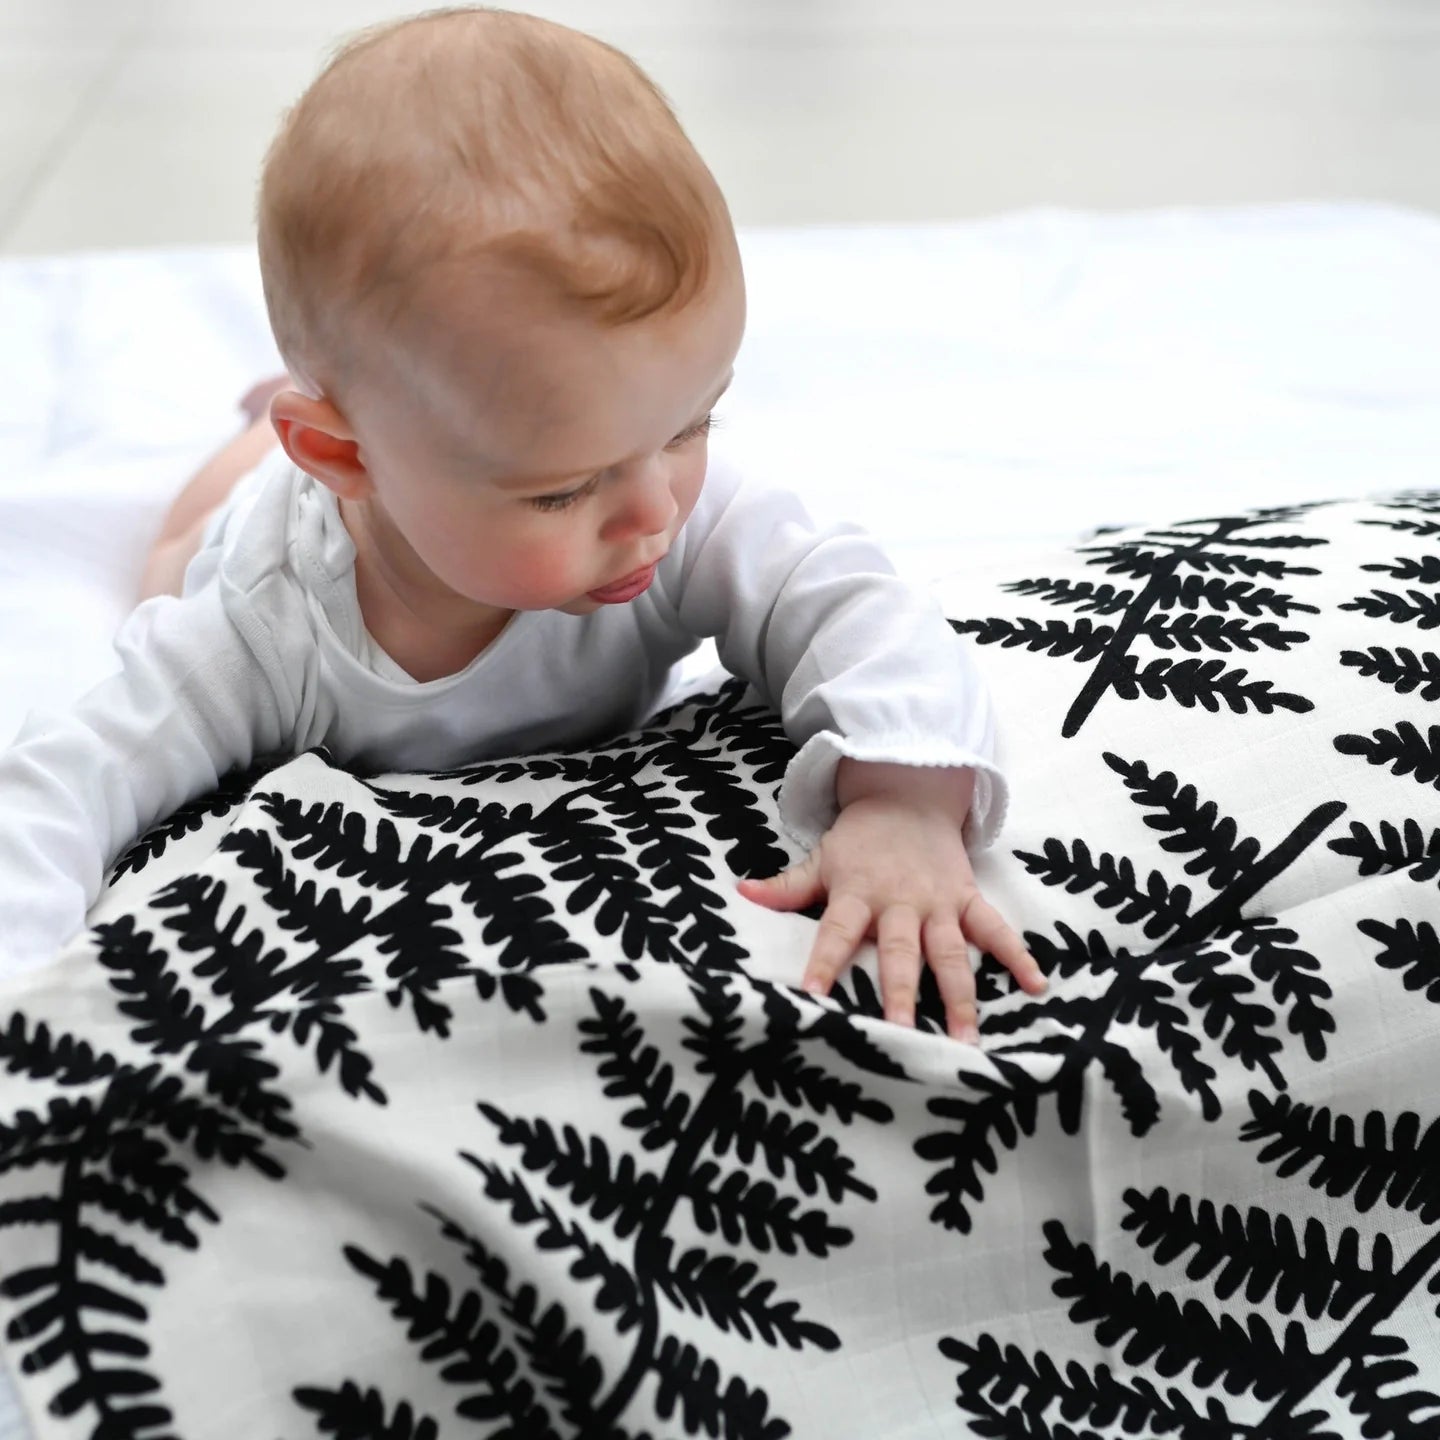 PLANT PRINT 3-PACK MUSLINS - for newborn to 4 month old babies | BY ETTA LOVES